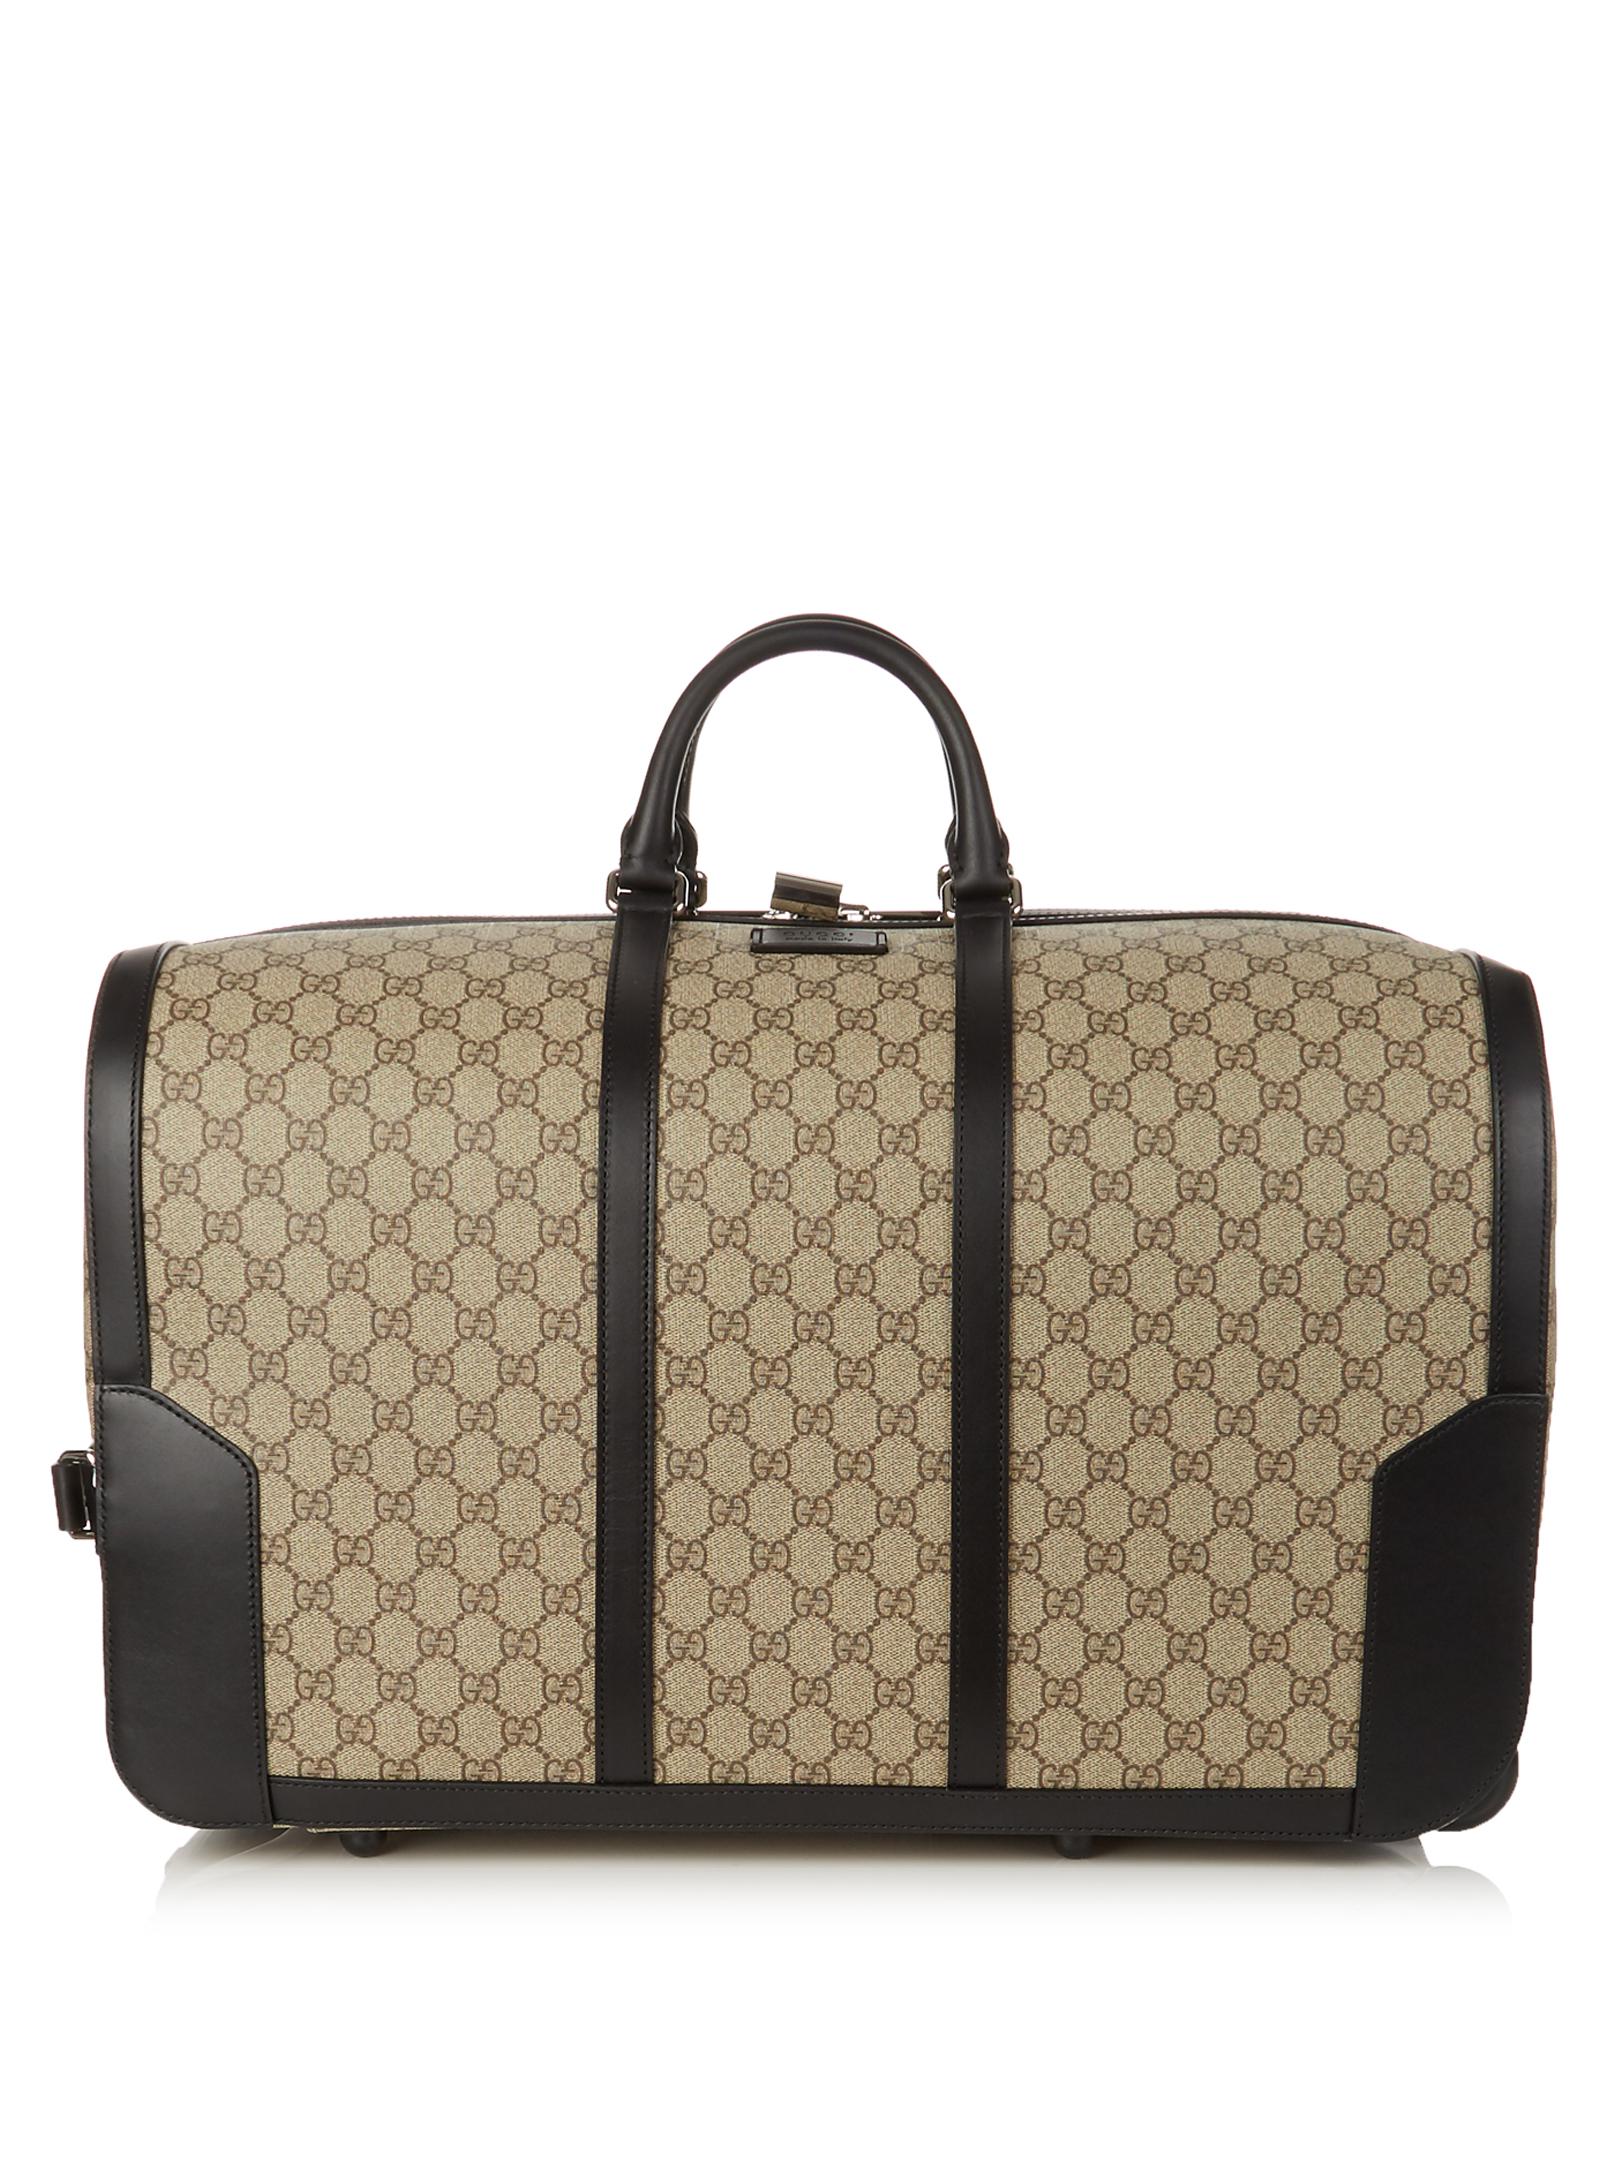 Gucci Eden Canvas And Leather Wheeled Carry-On Bag in Brown - Lyst